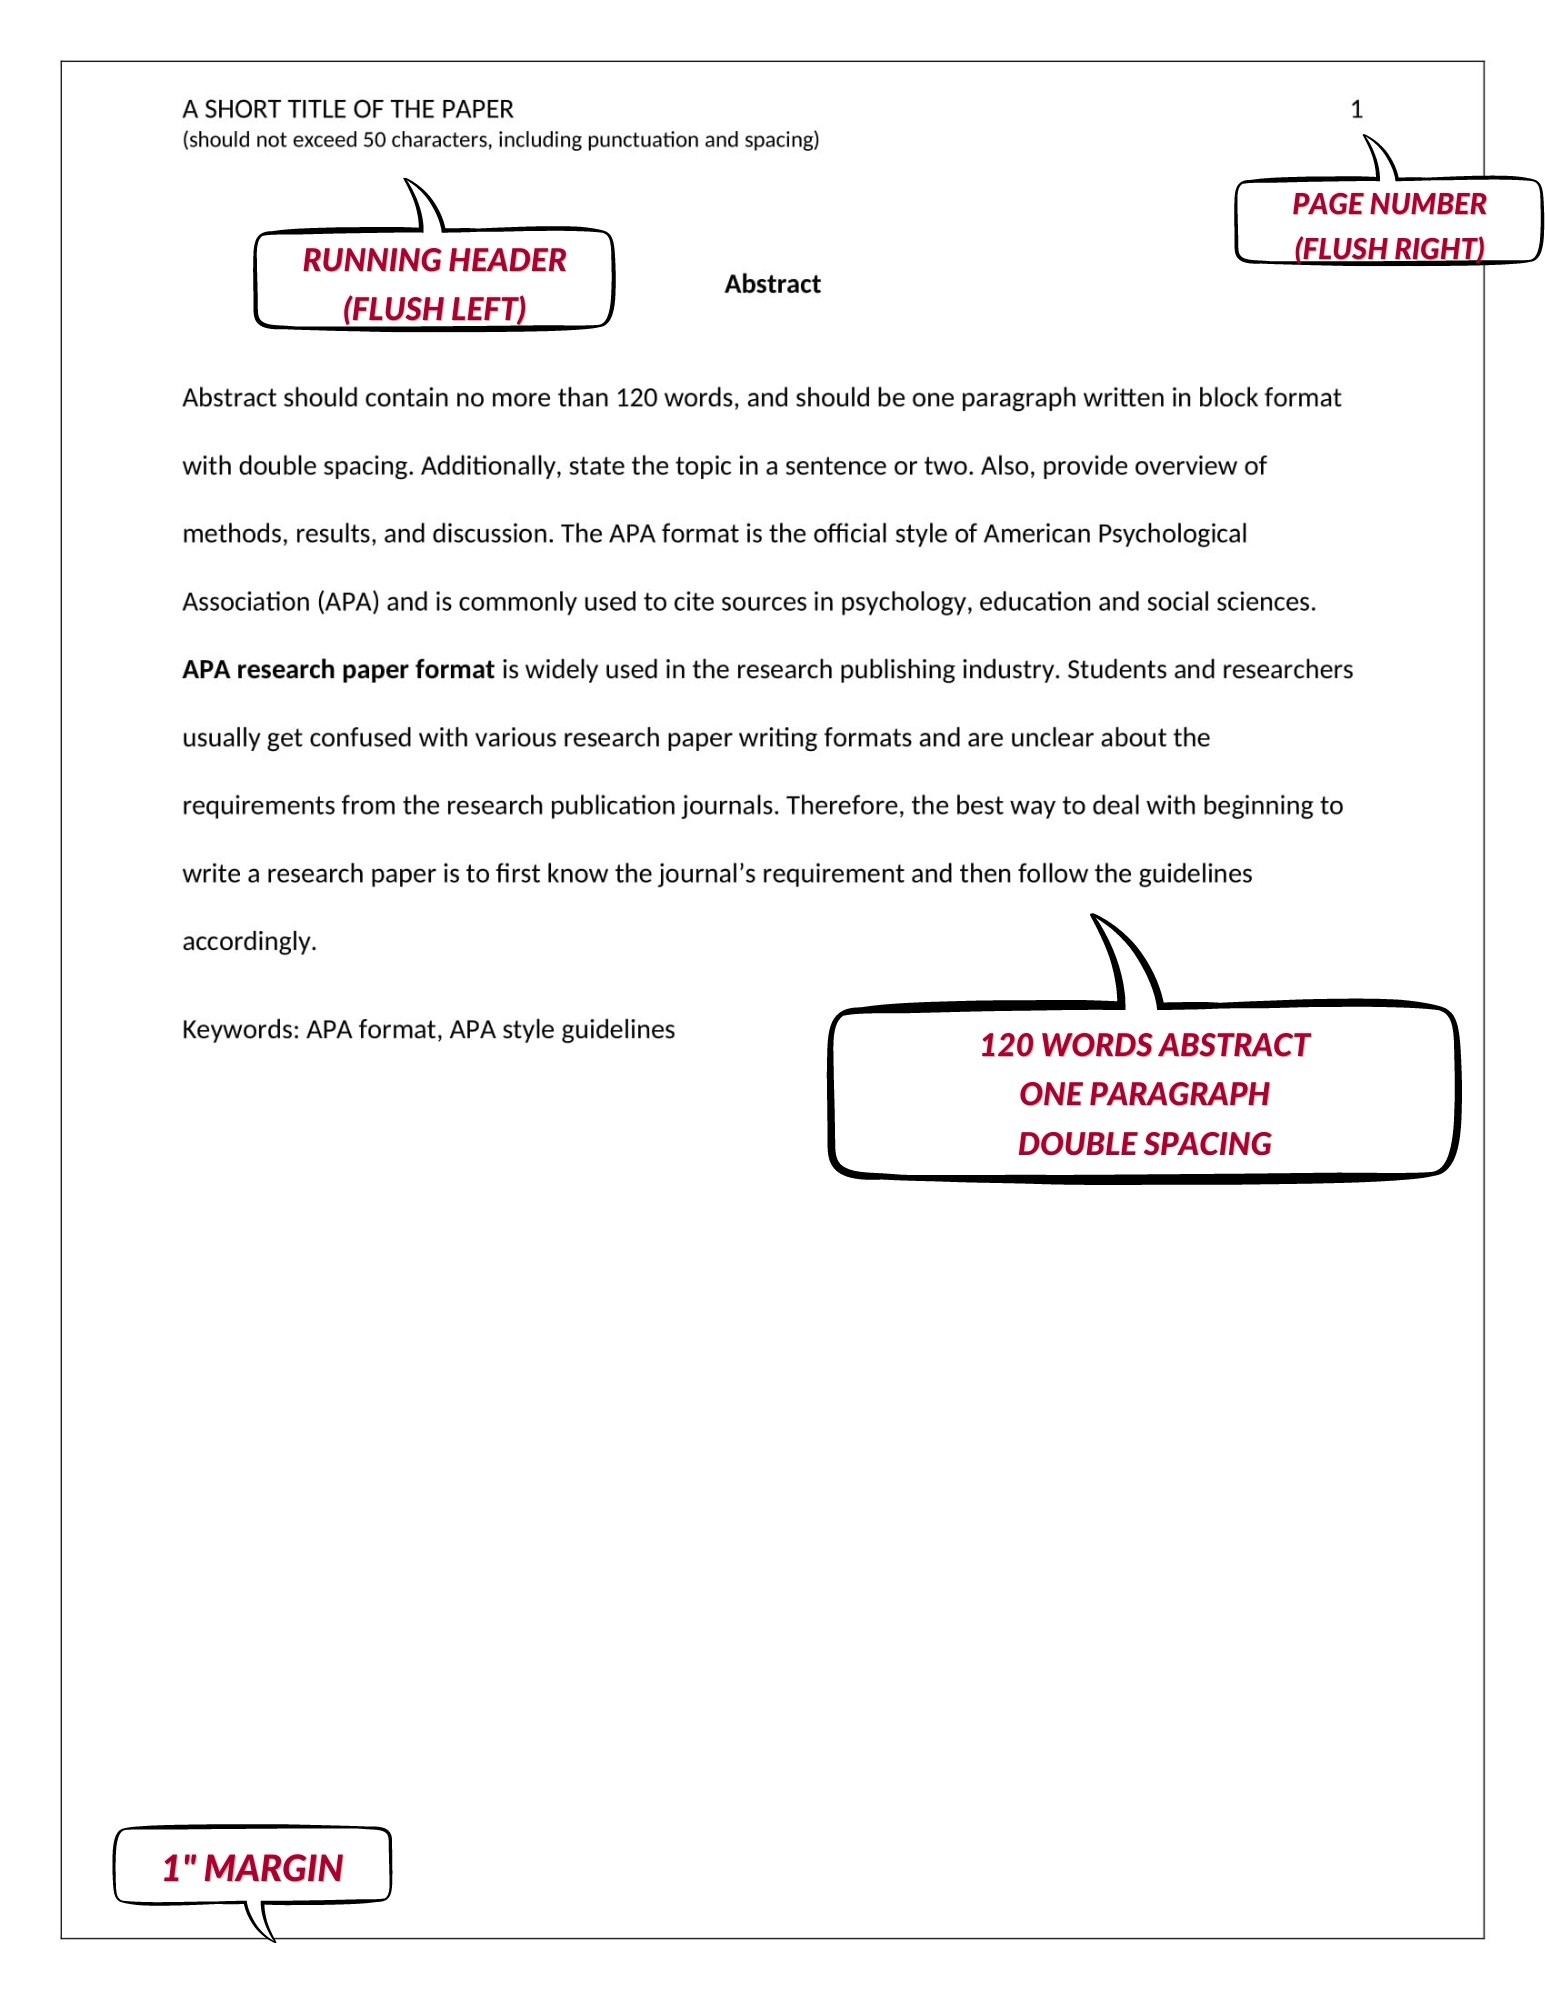 apa style science research paper